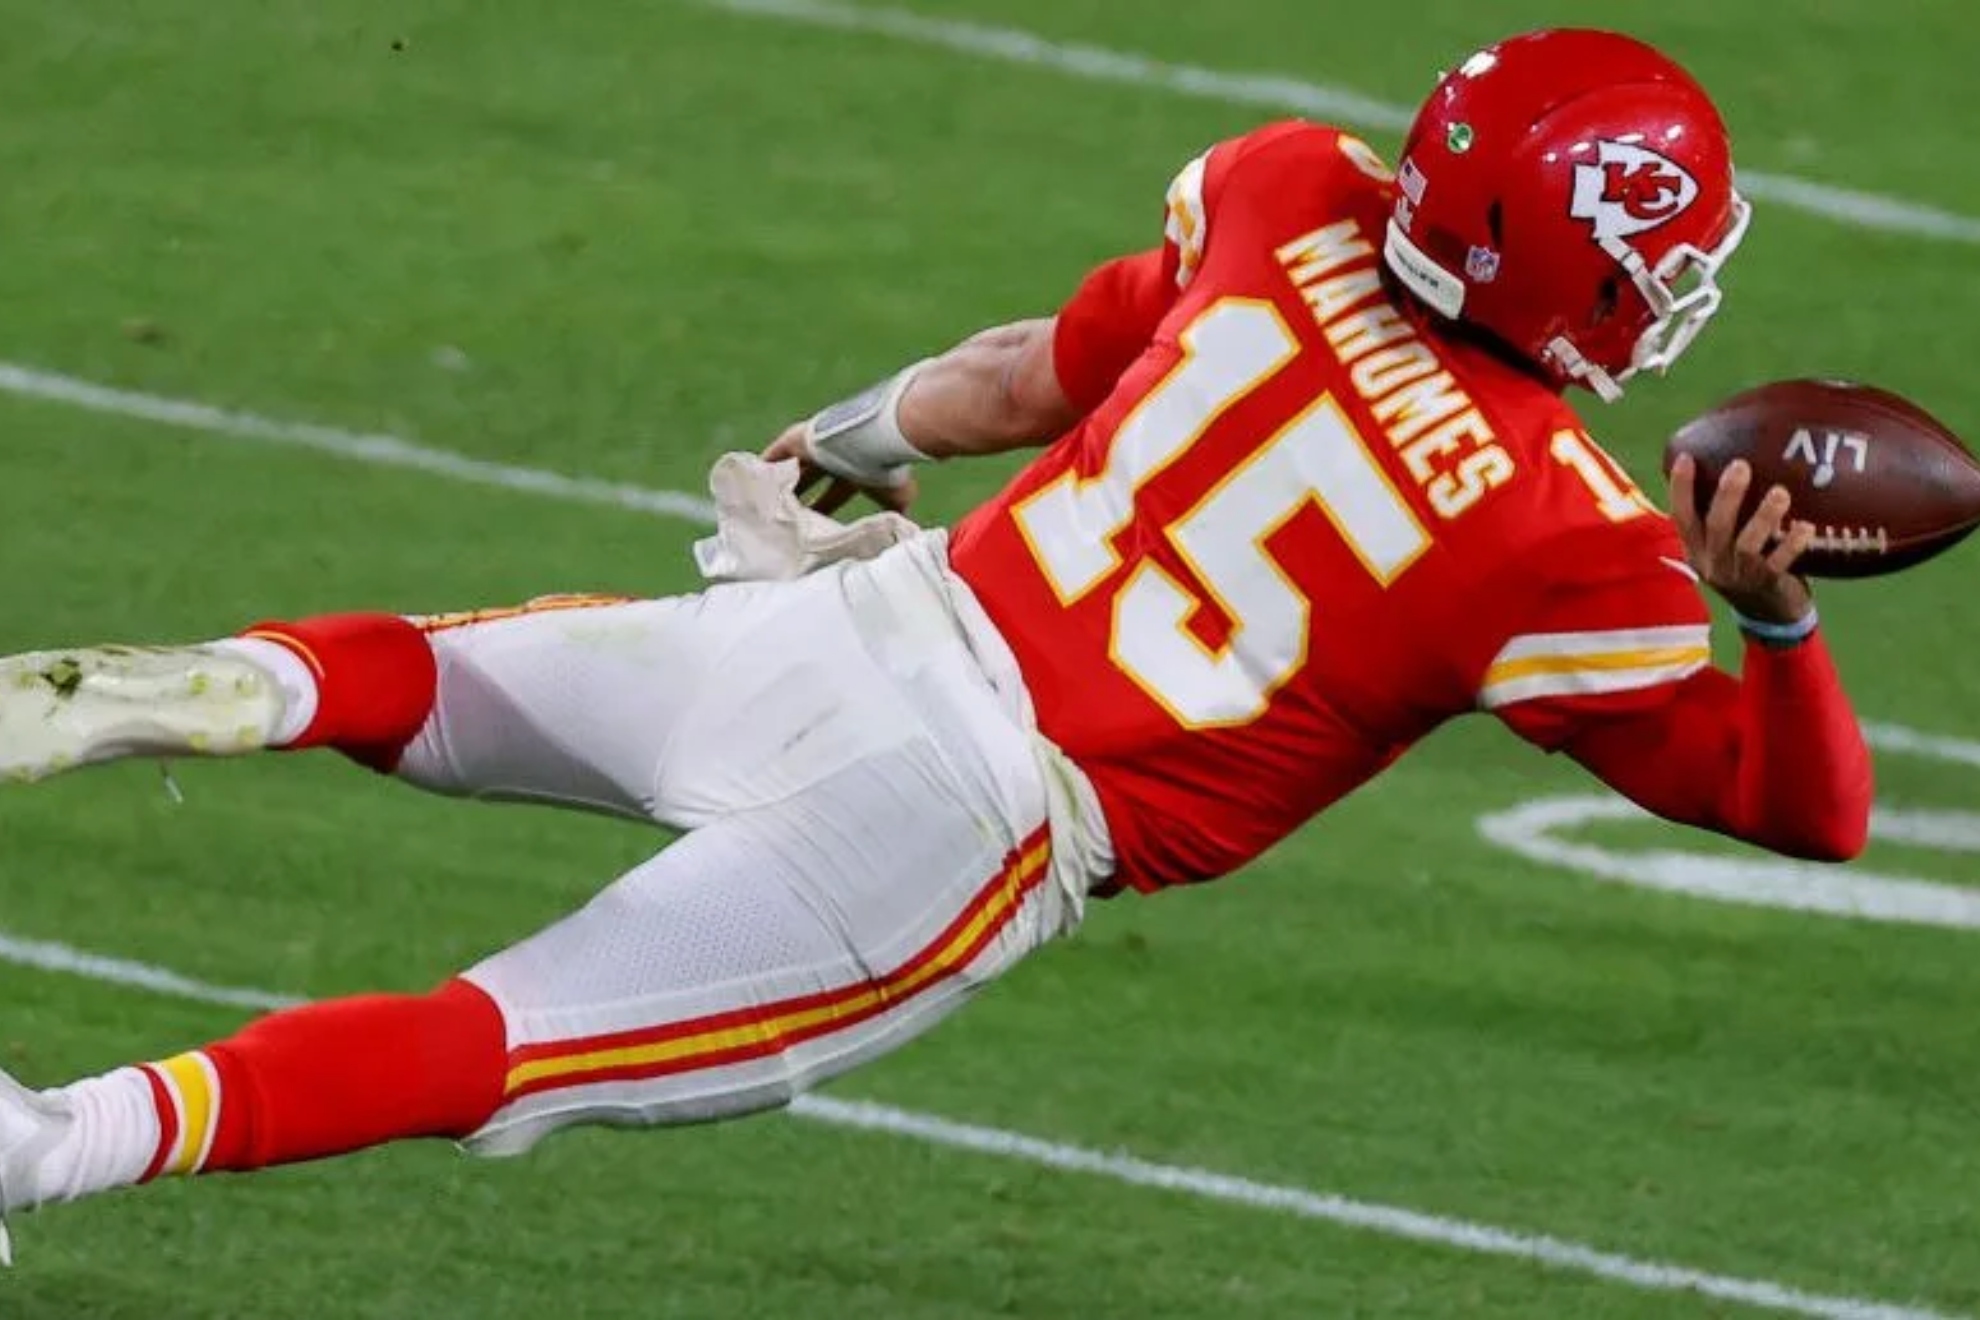 Patrick Mahomes' iconic "Superman" move takes center stage in Madden 24